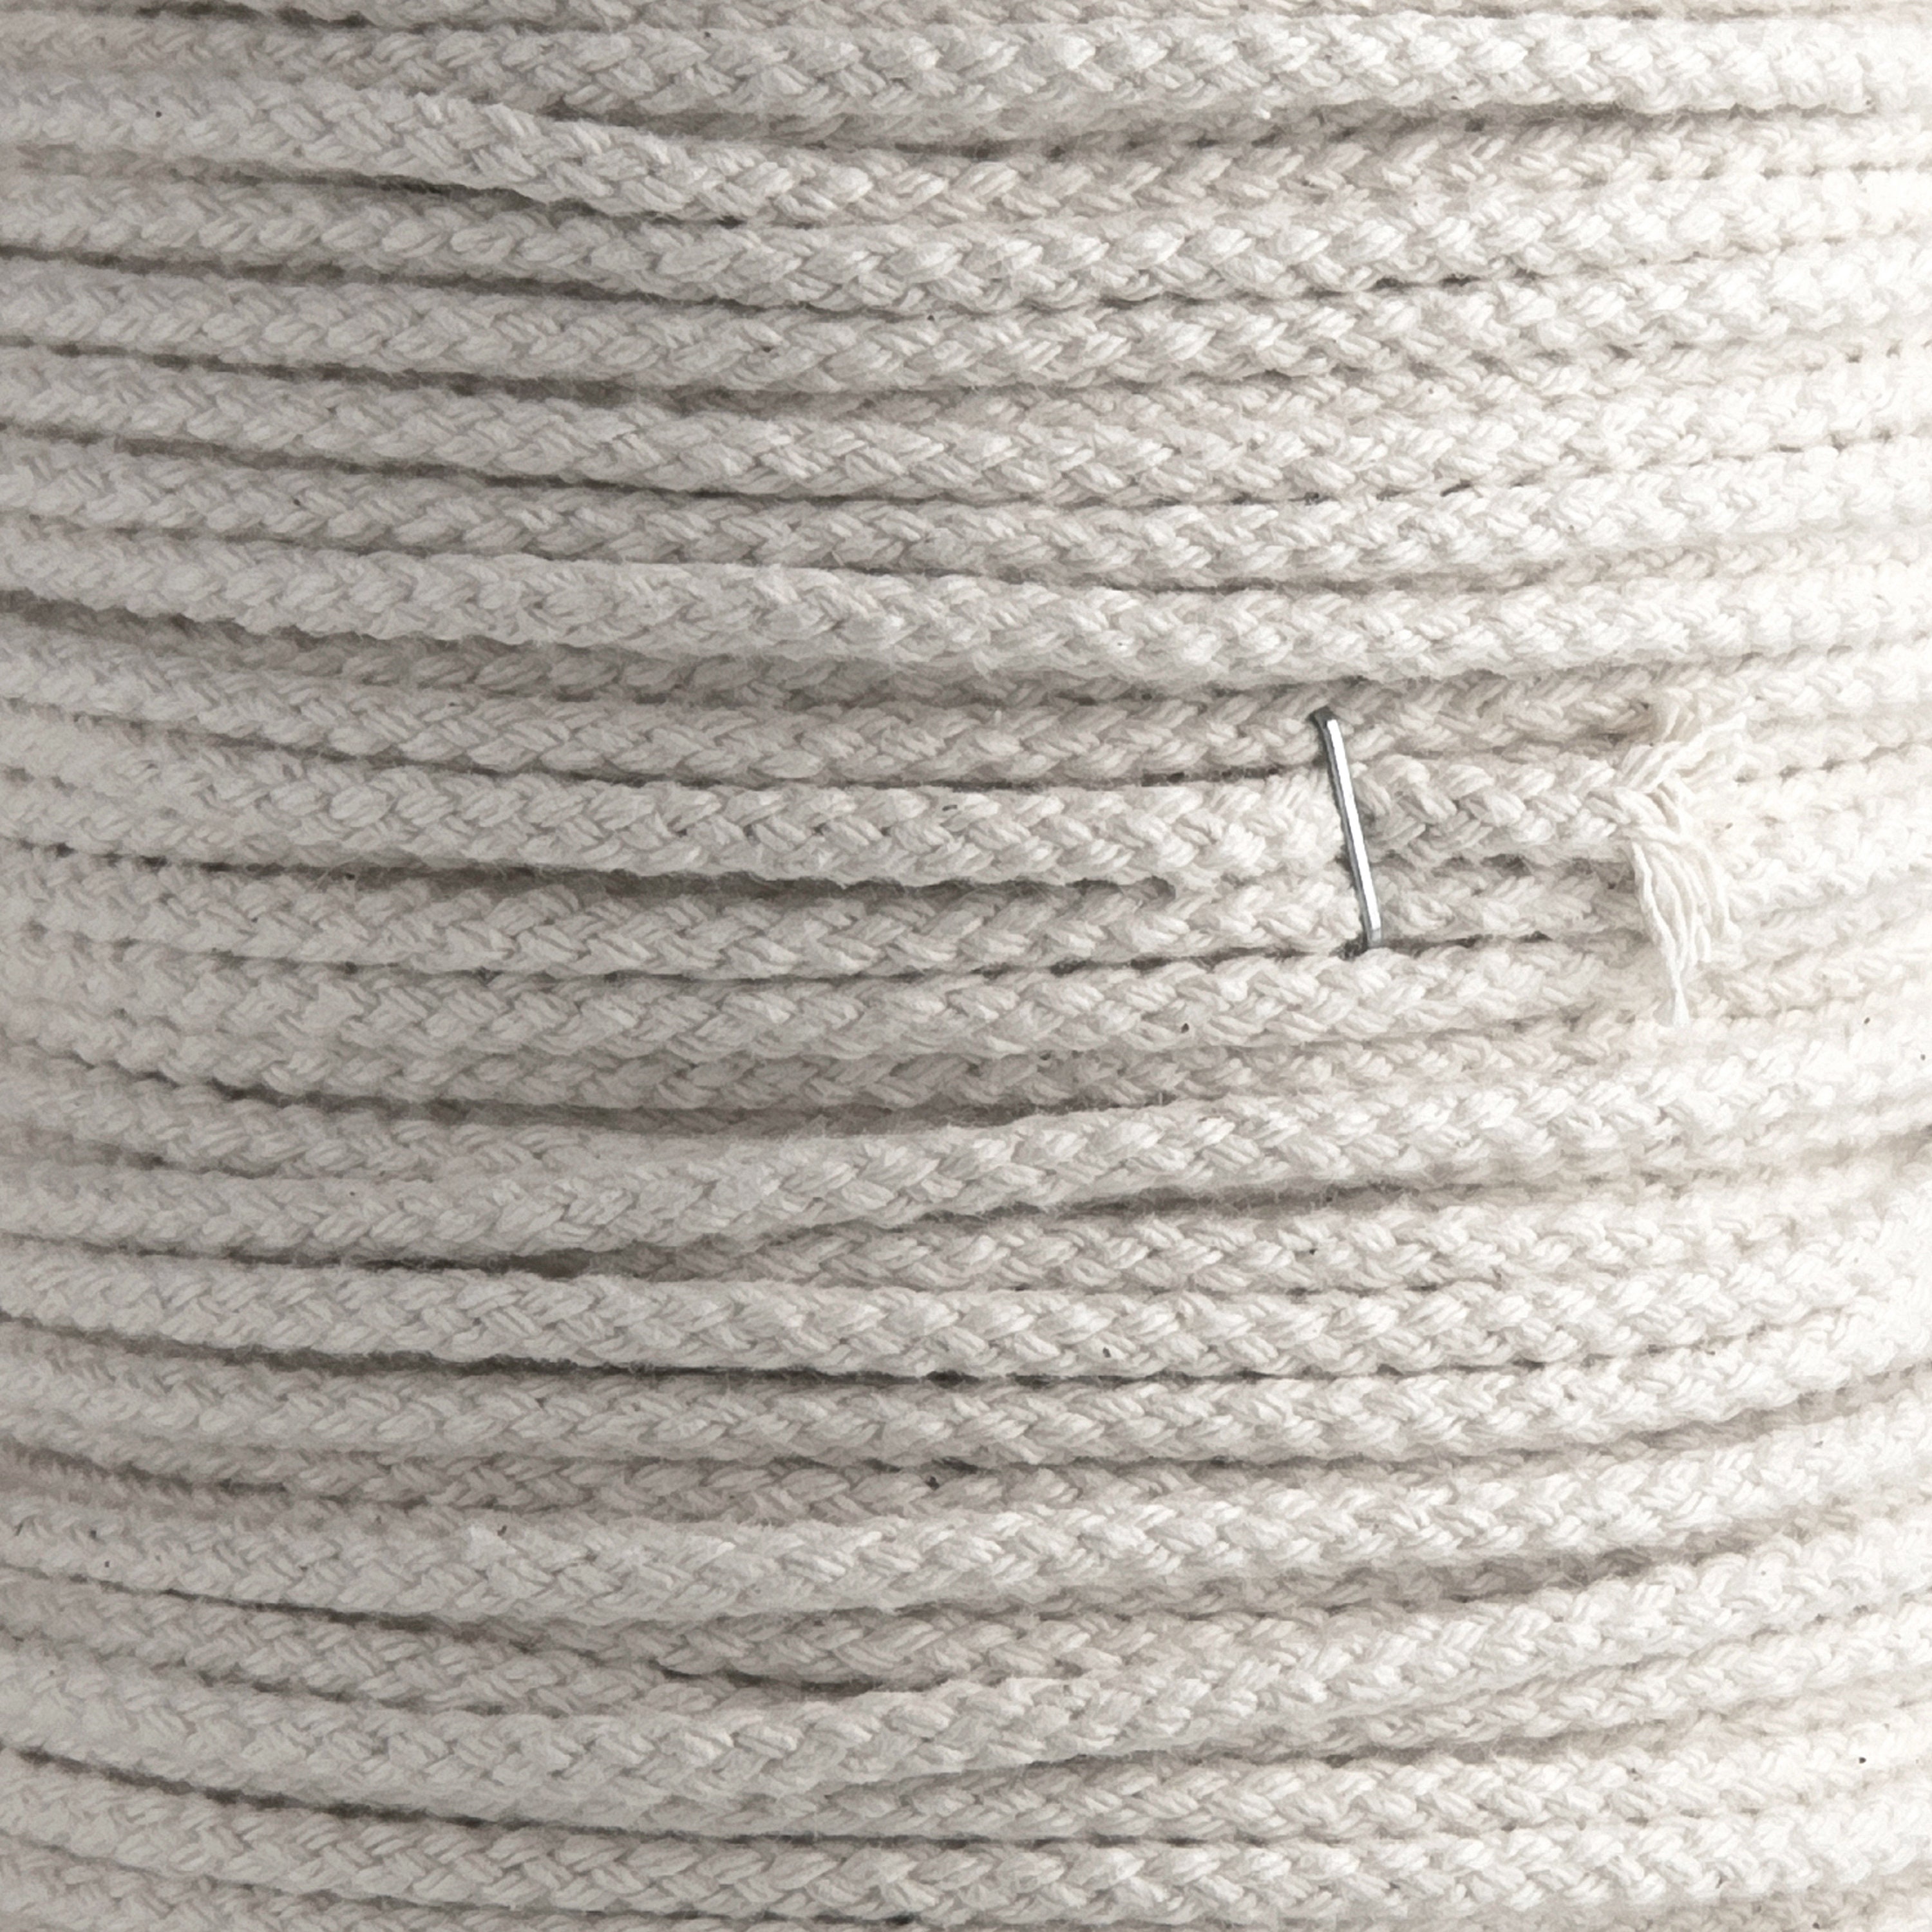 4mm coiled natural macrame cotton rope – Careless Threads